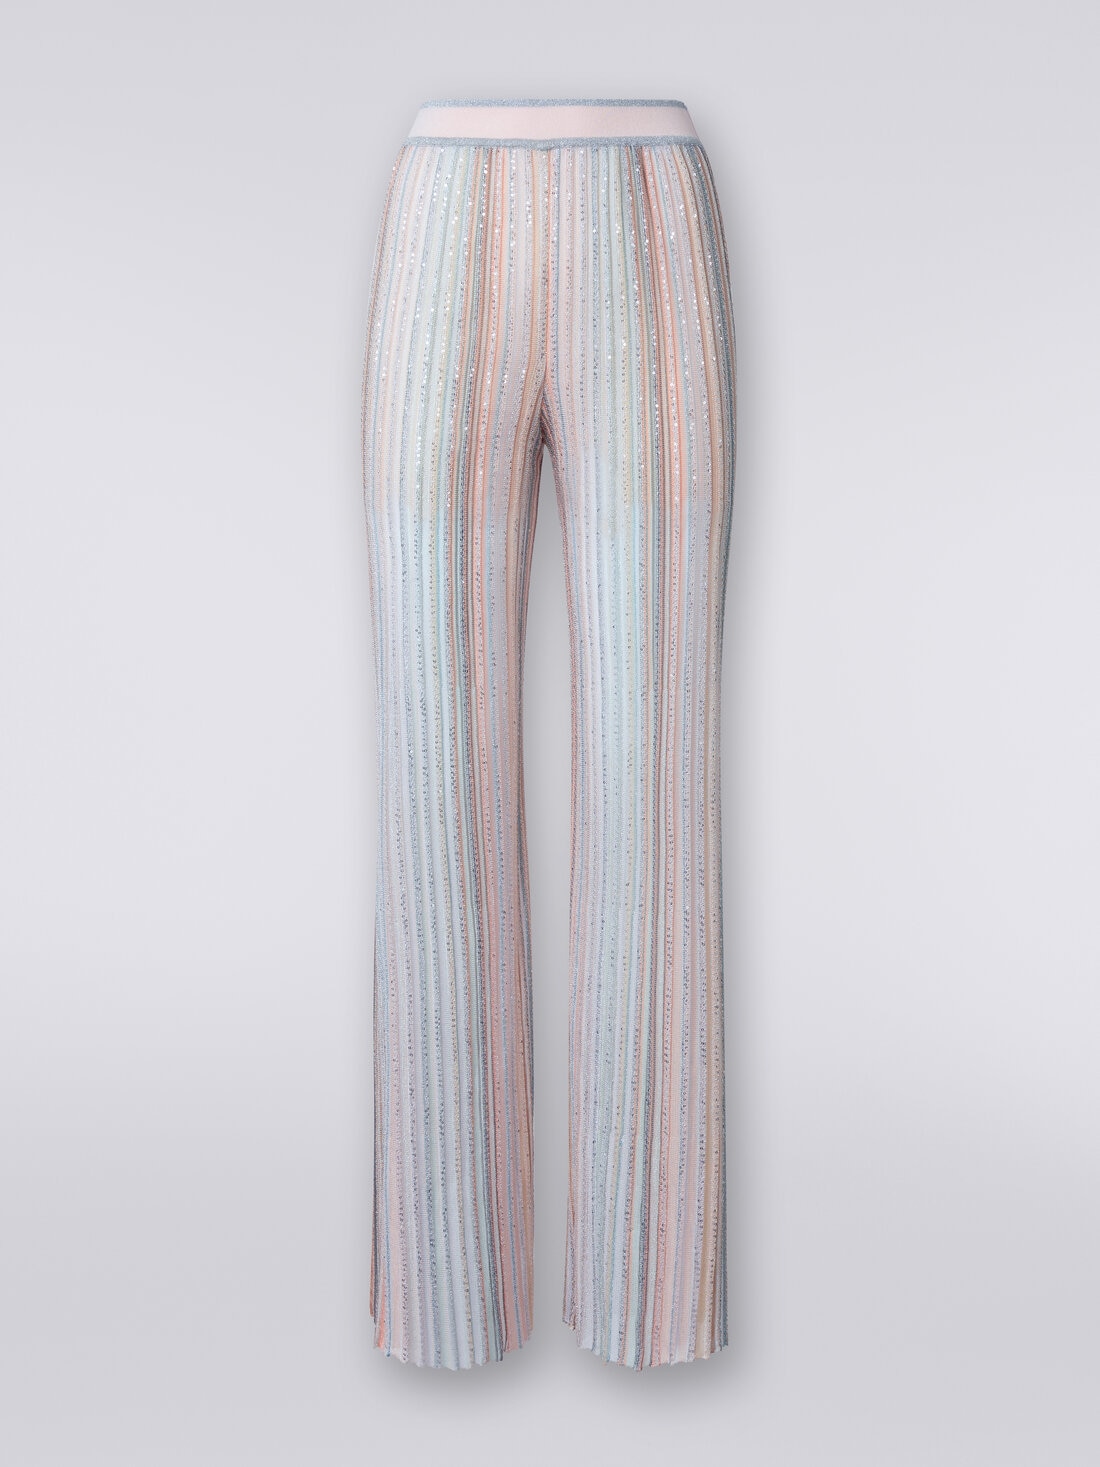 Trousers in vertical striped knit with sequins, Multicoloured  - DS24SI11BK033MSM9AH - 0